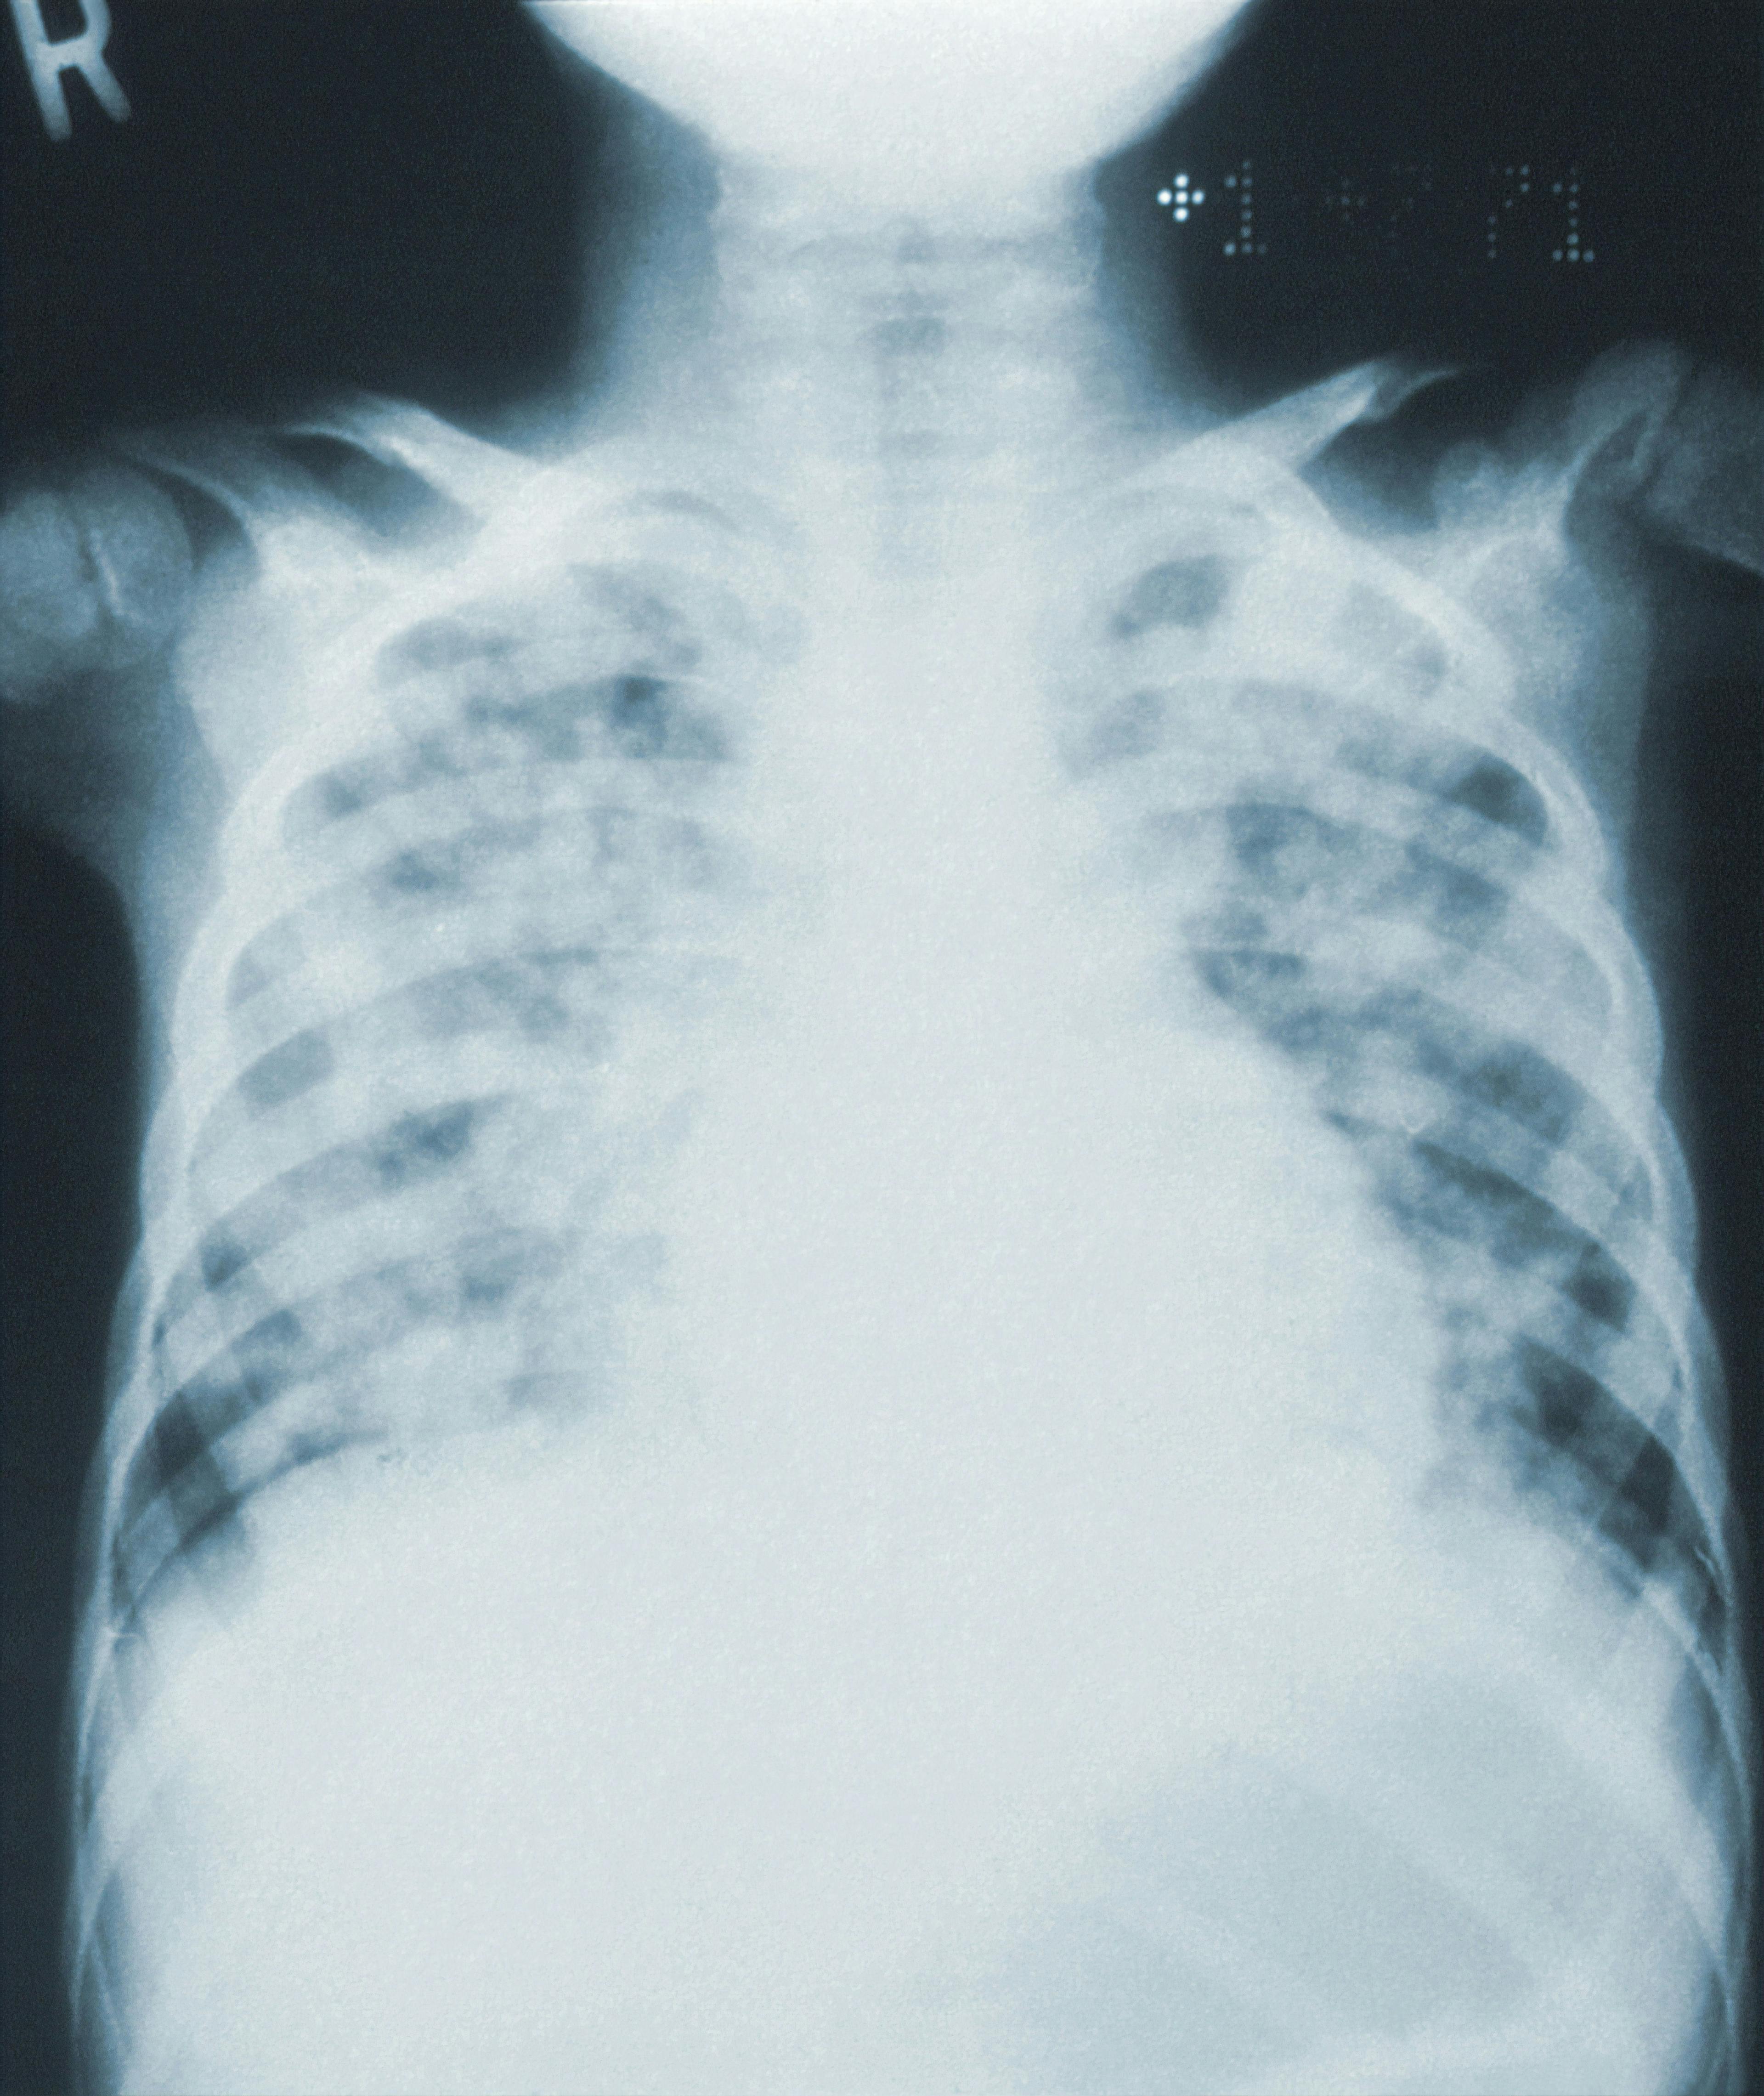 Community Acquired Pneumonia Often Inappropriately Diagnosed in Hospital Admissions